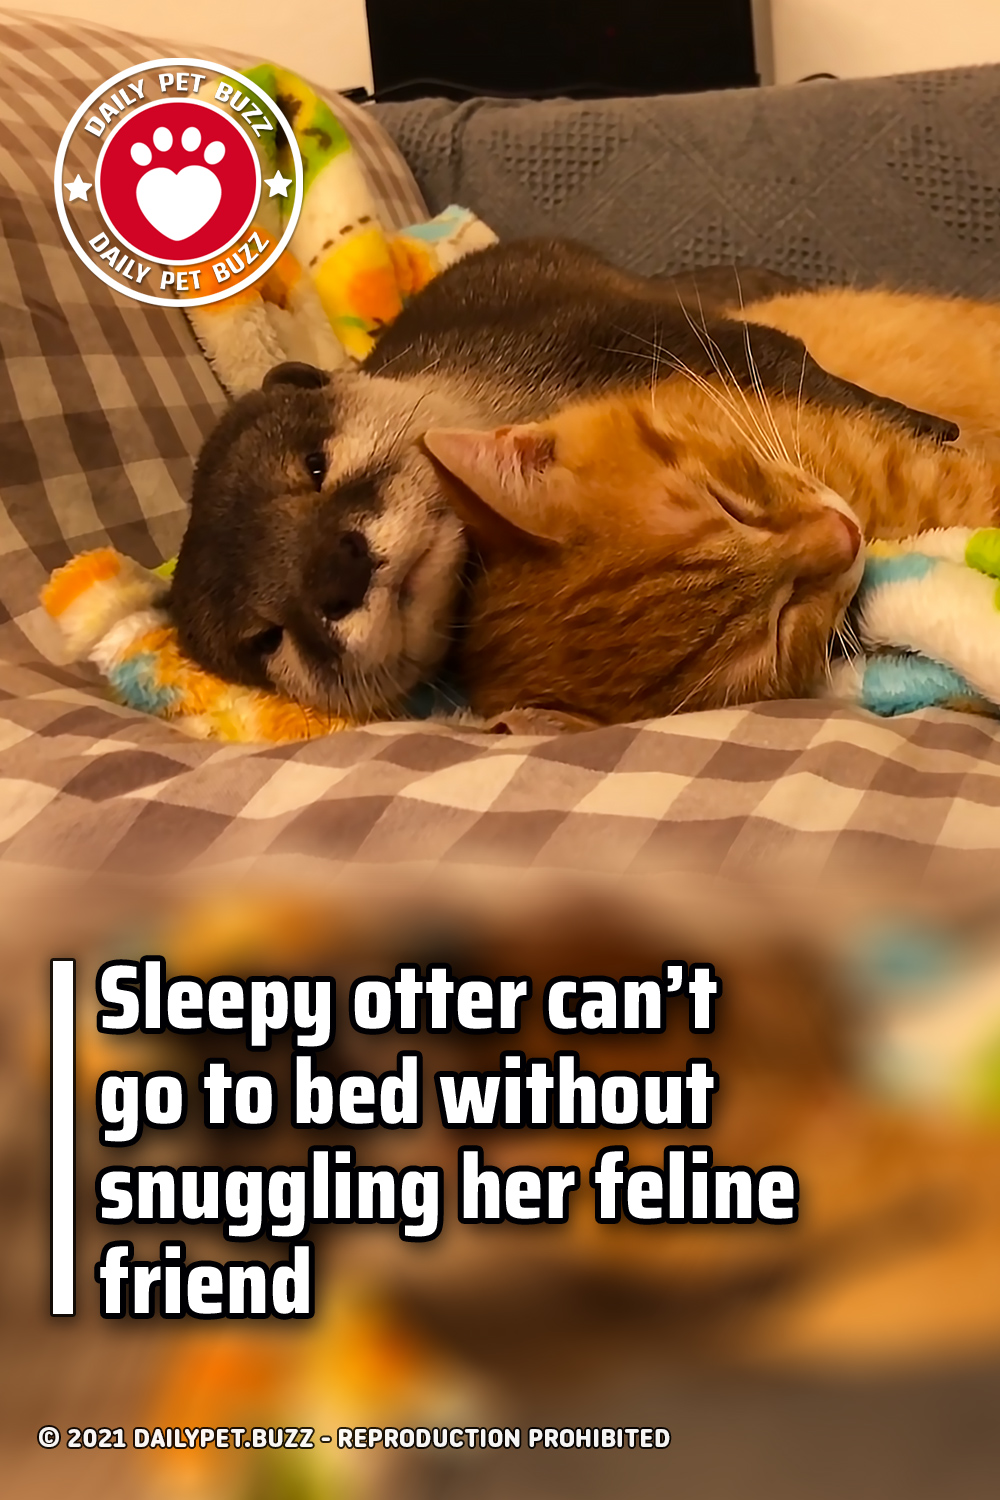 Sleepy otter can’t go to bed without snuggling her feline friend